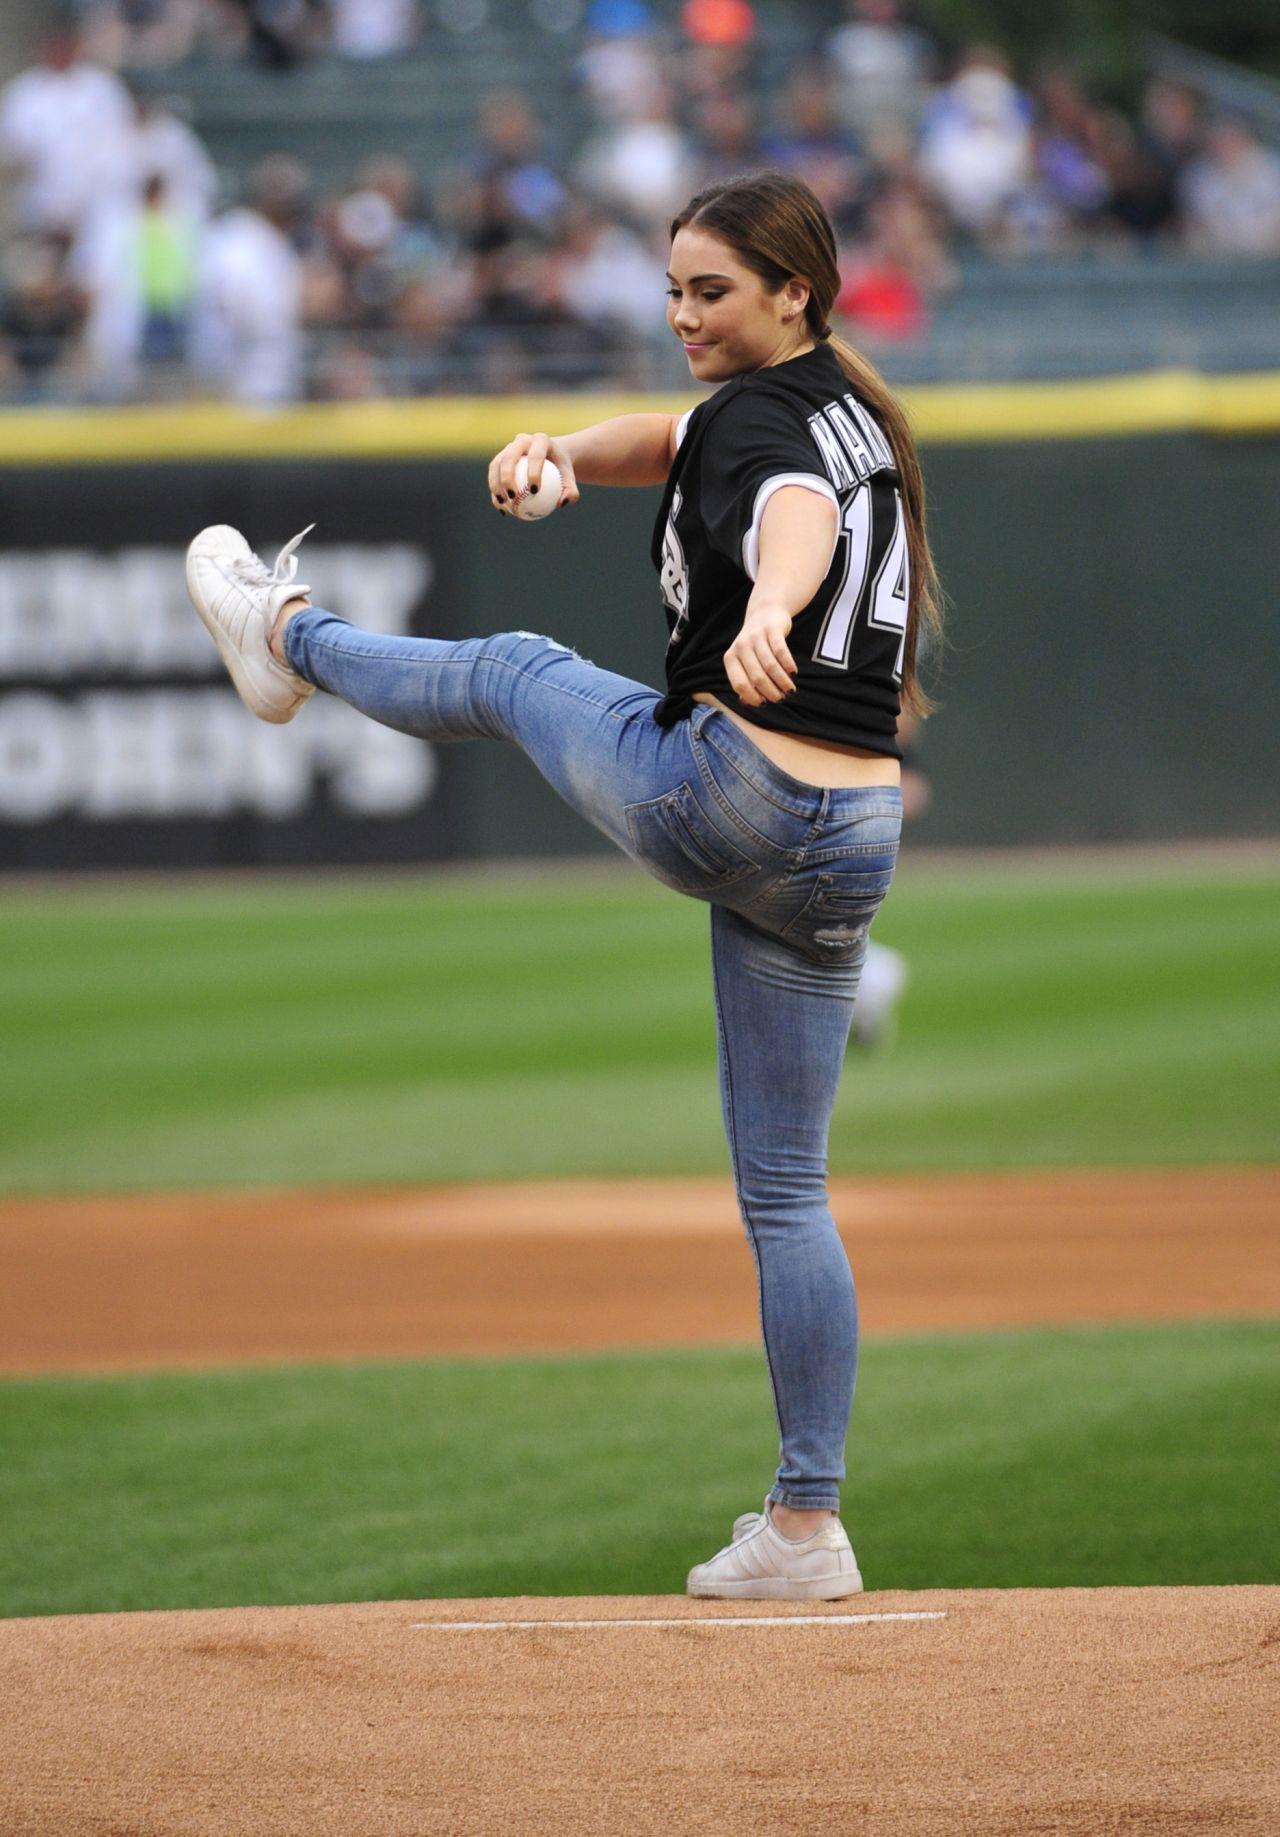 Maroney Pitch at Chicago White Sox Game